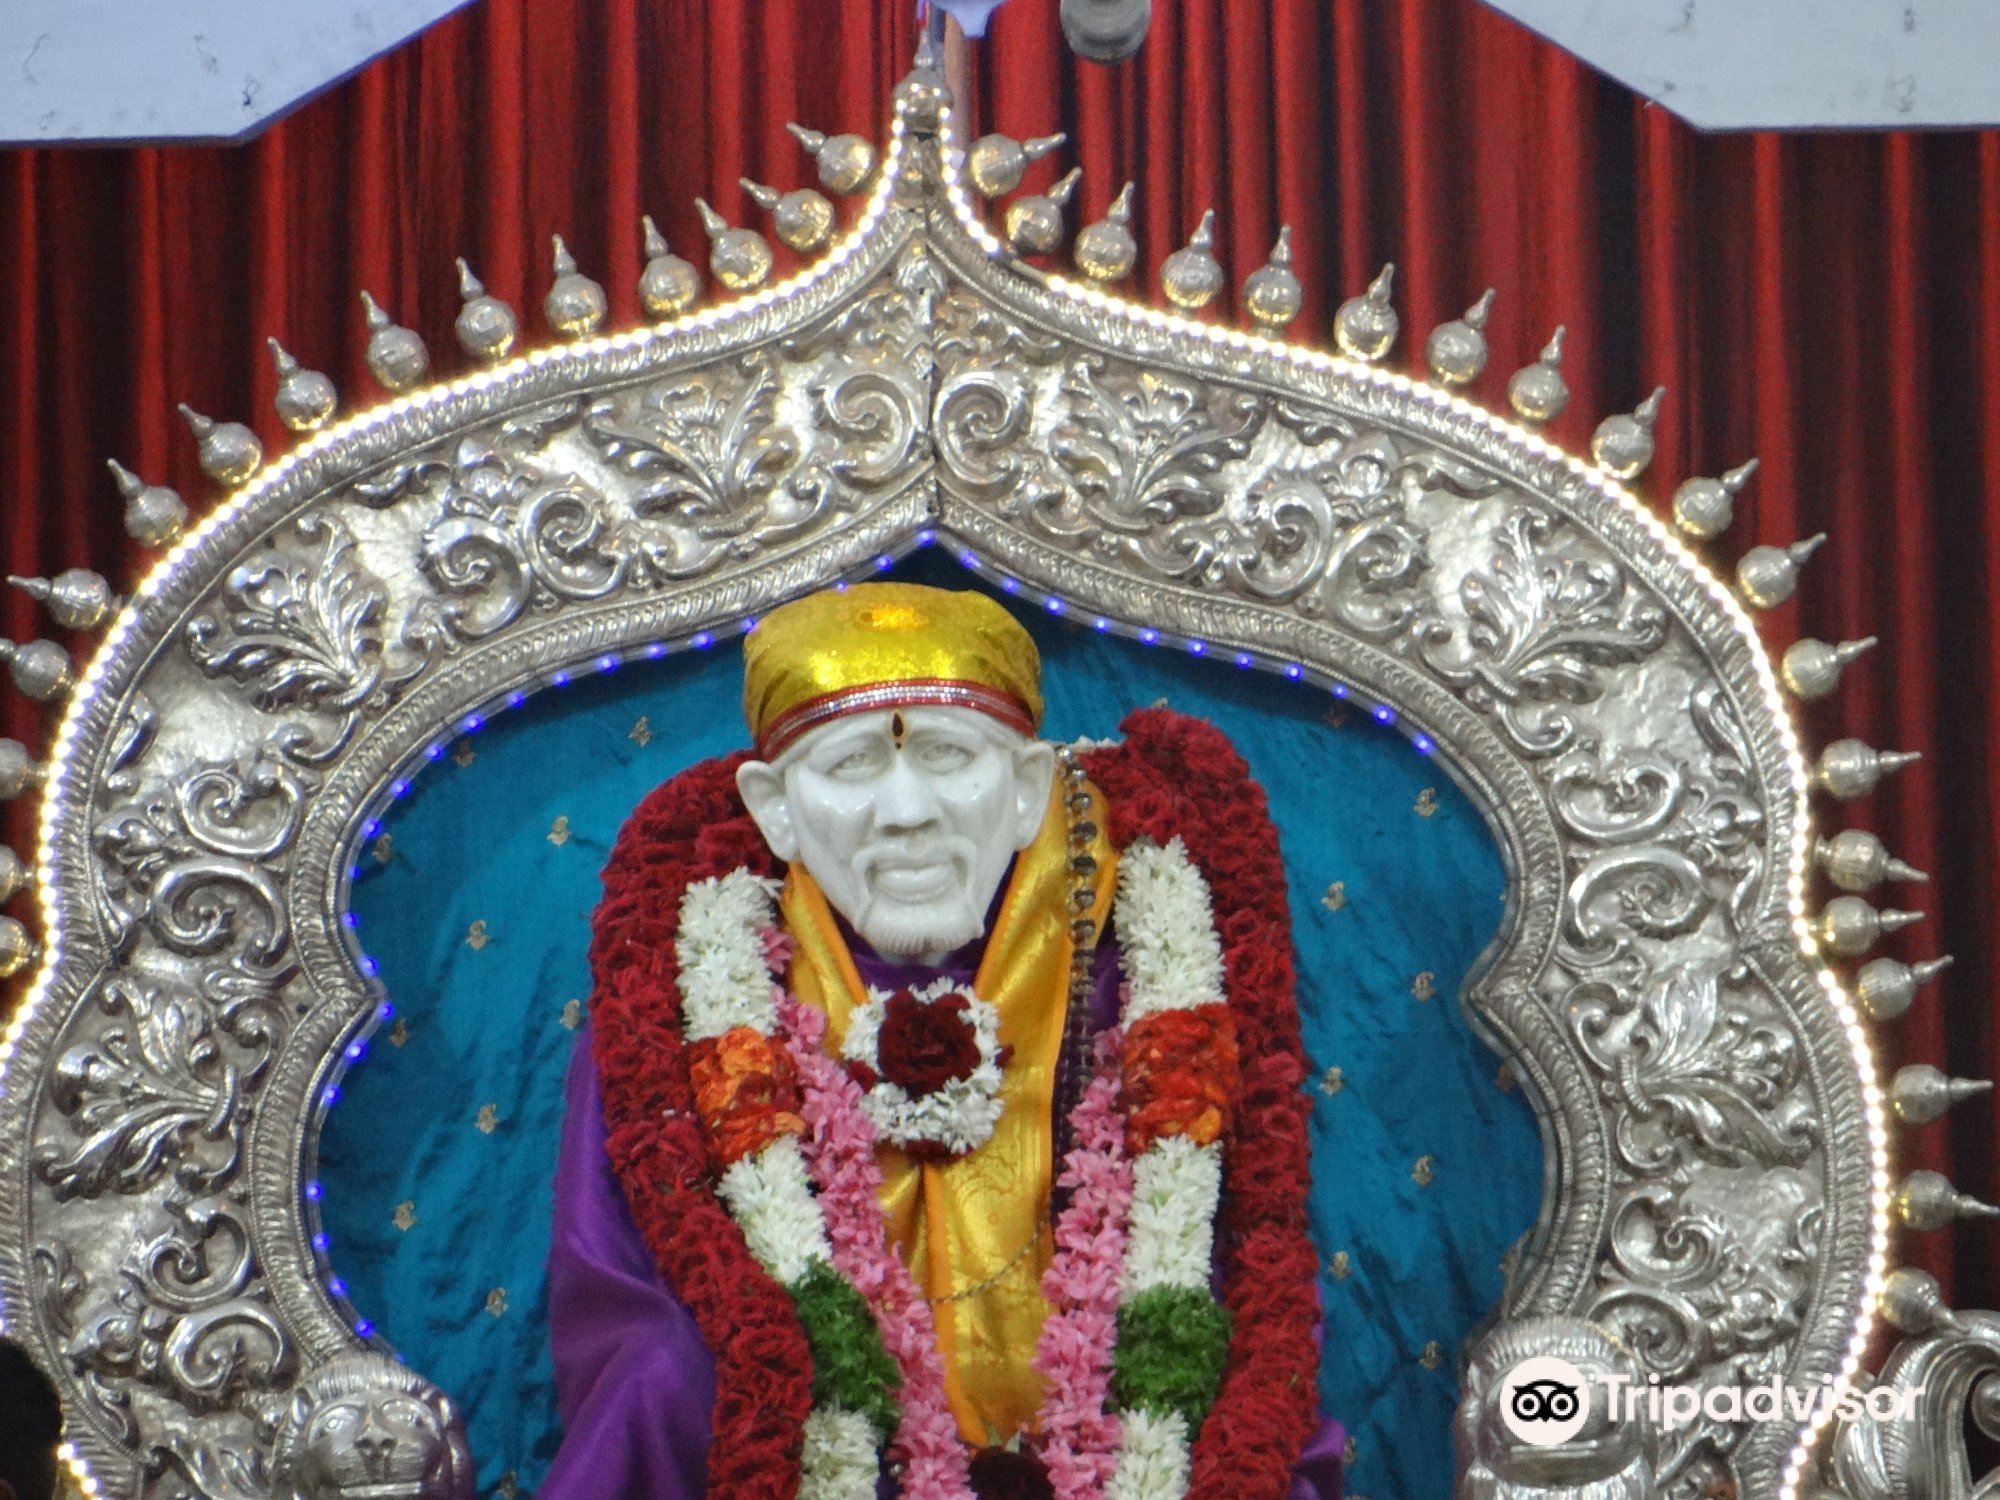 Sai Baba Temple attraction reviews - Sai Baba Temple tickets - Sai Baba  Temple discounts - Sai Baba Temple transportation, address, opening hours -  attractions, hotels, and food near Sai Baba Temple 